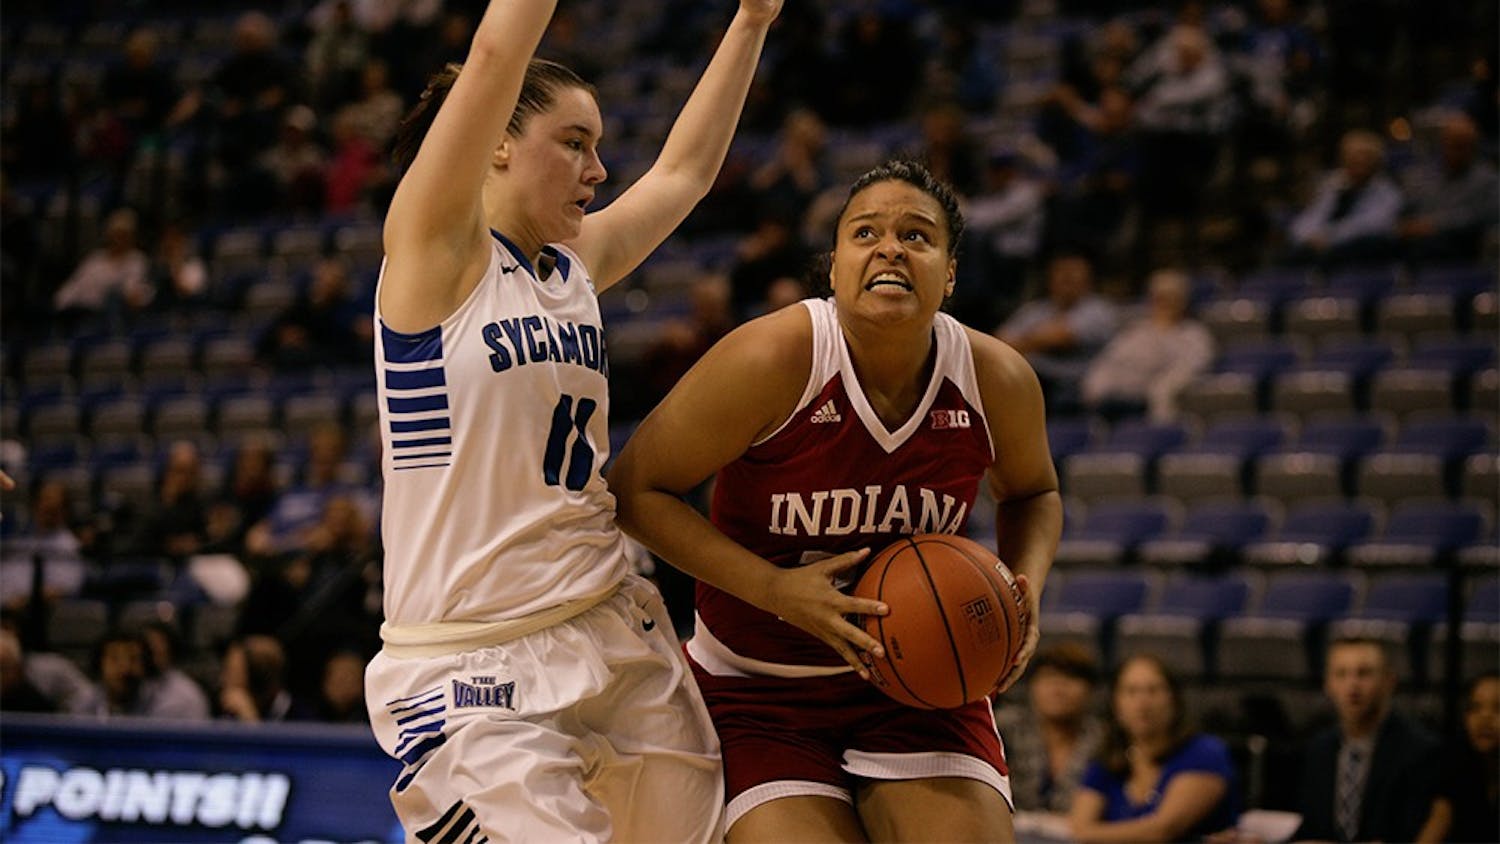 Junior guard Karlee McBride moves the ball up the court against Indiana State at a game in December. The Hoosiers defeated the Sycamores 53-52 at the Hulman Center.